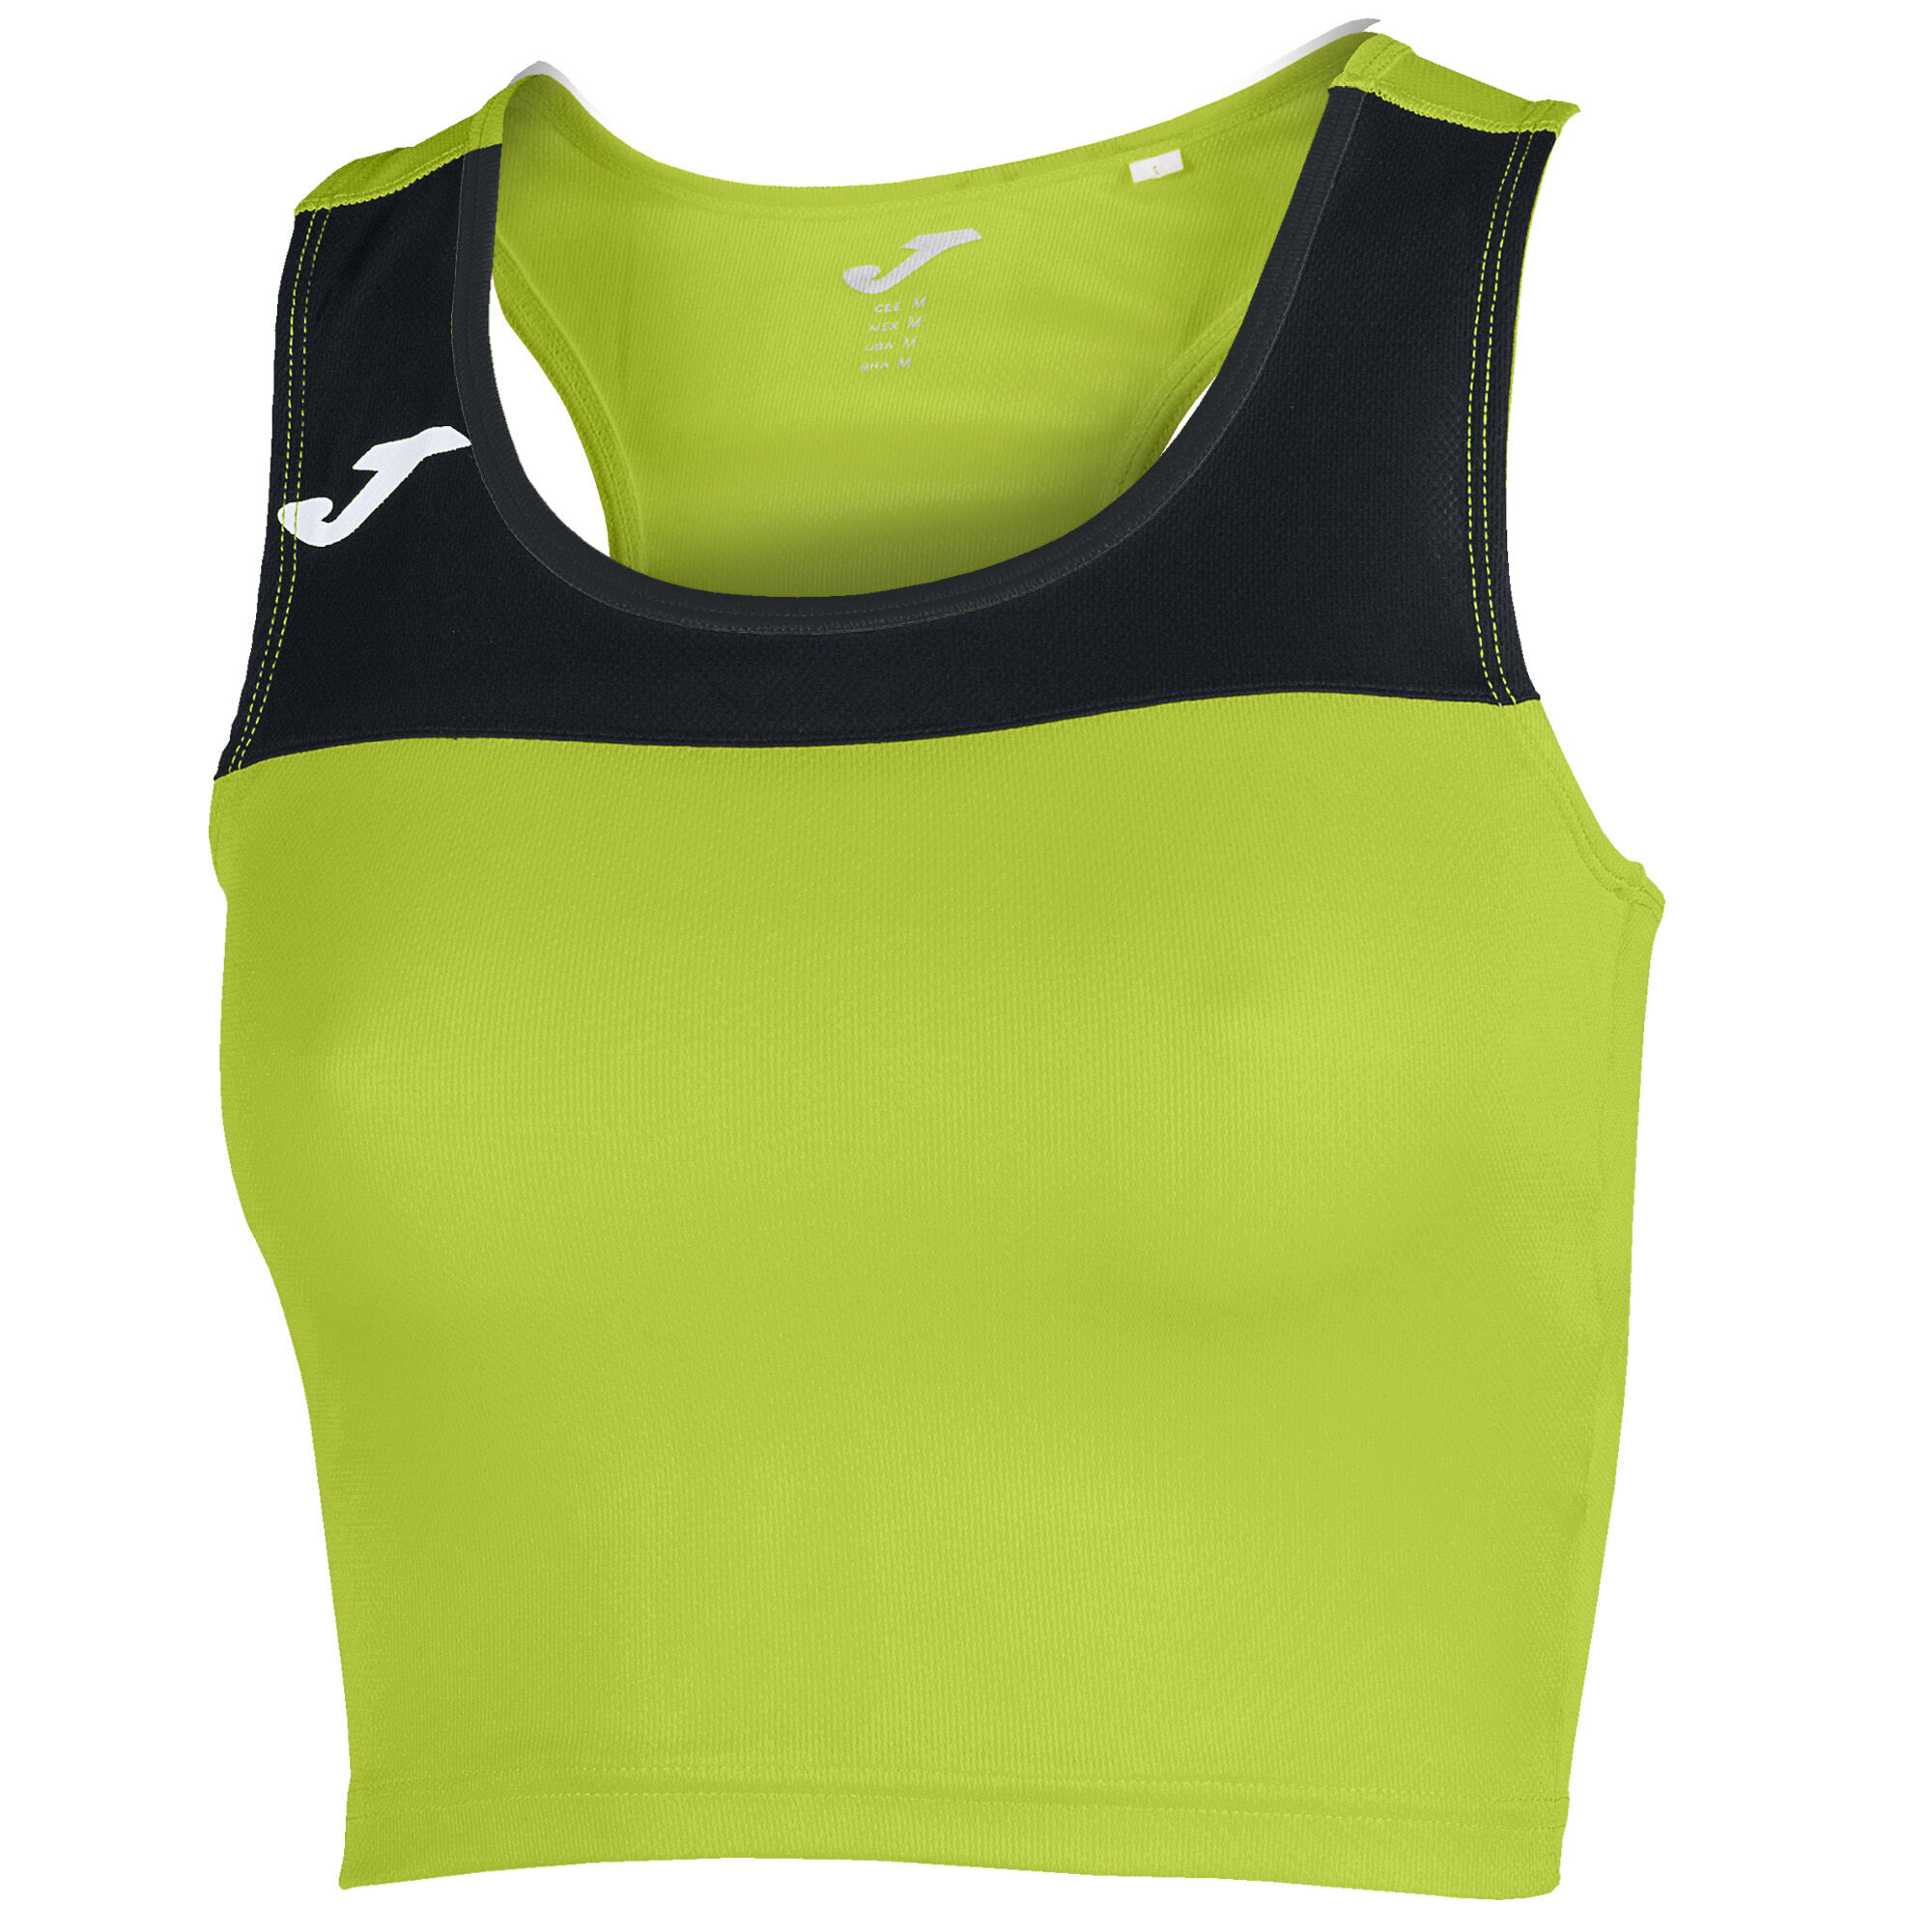 TOP DONNA RACE LIME NERO